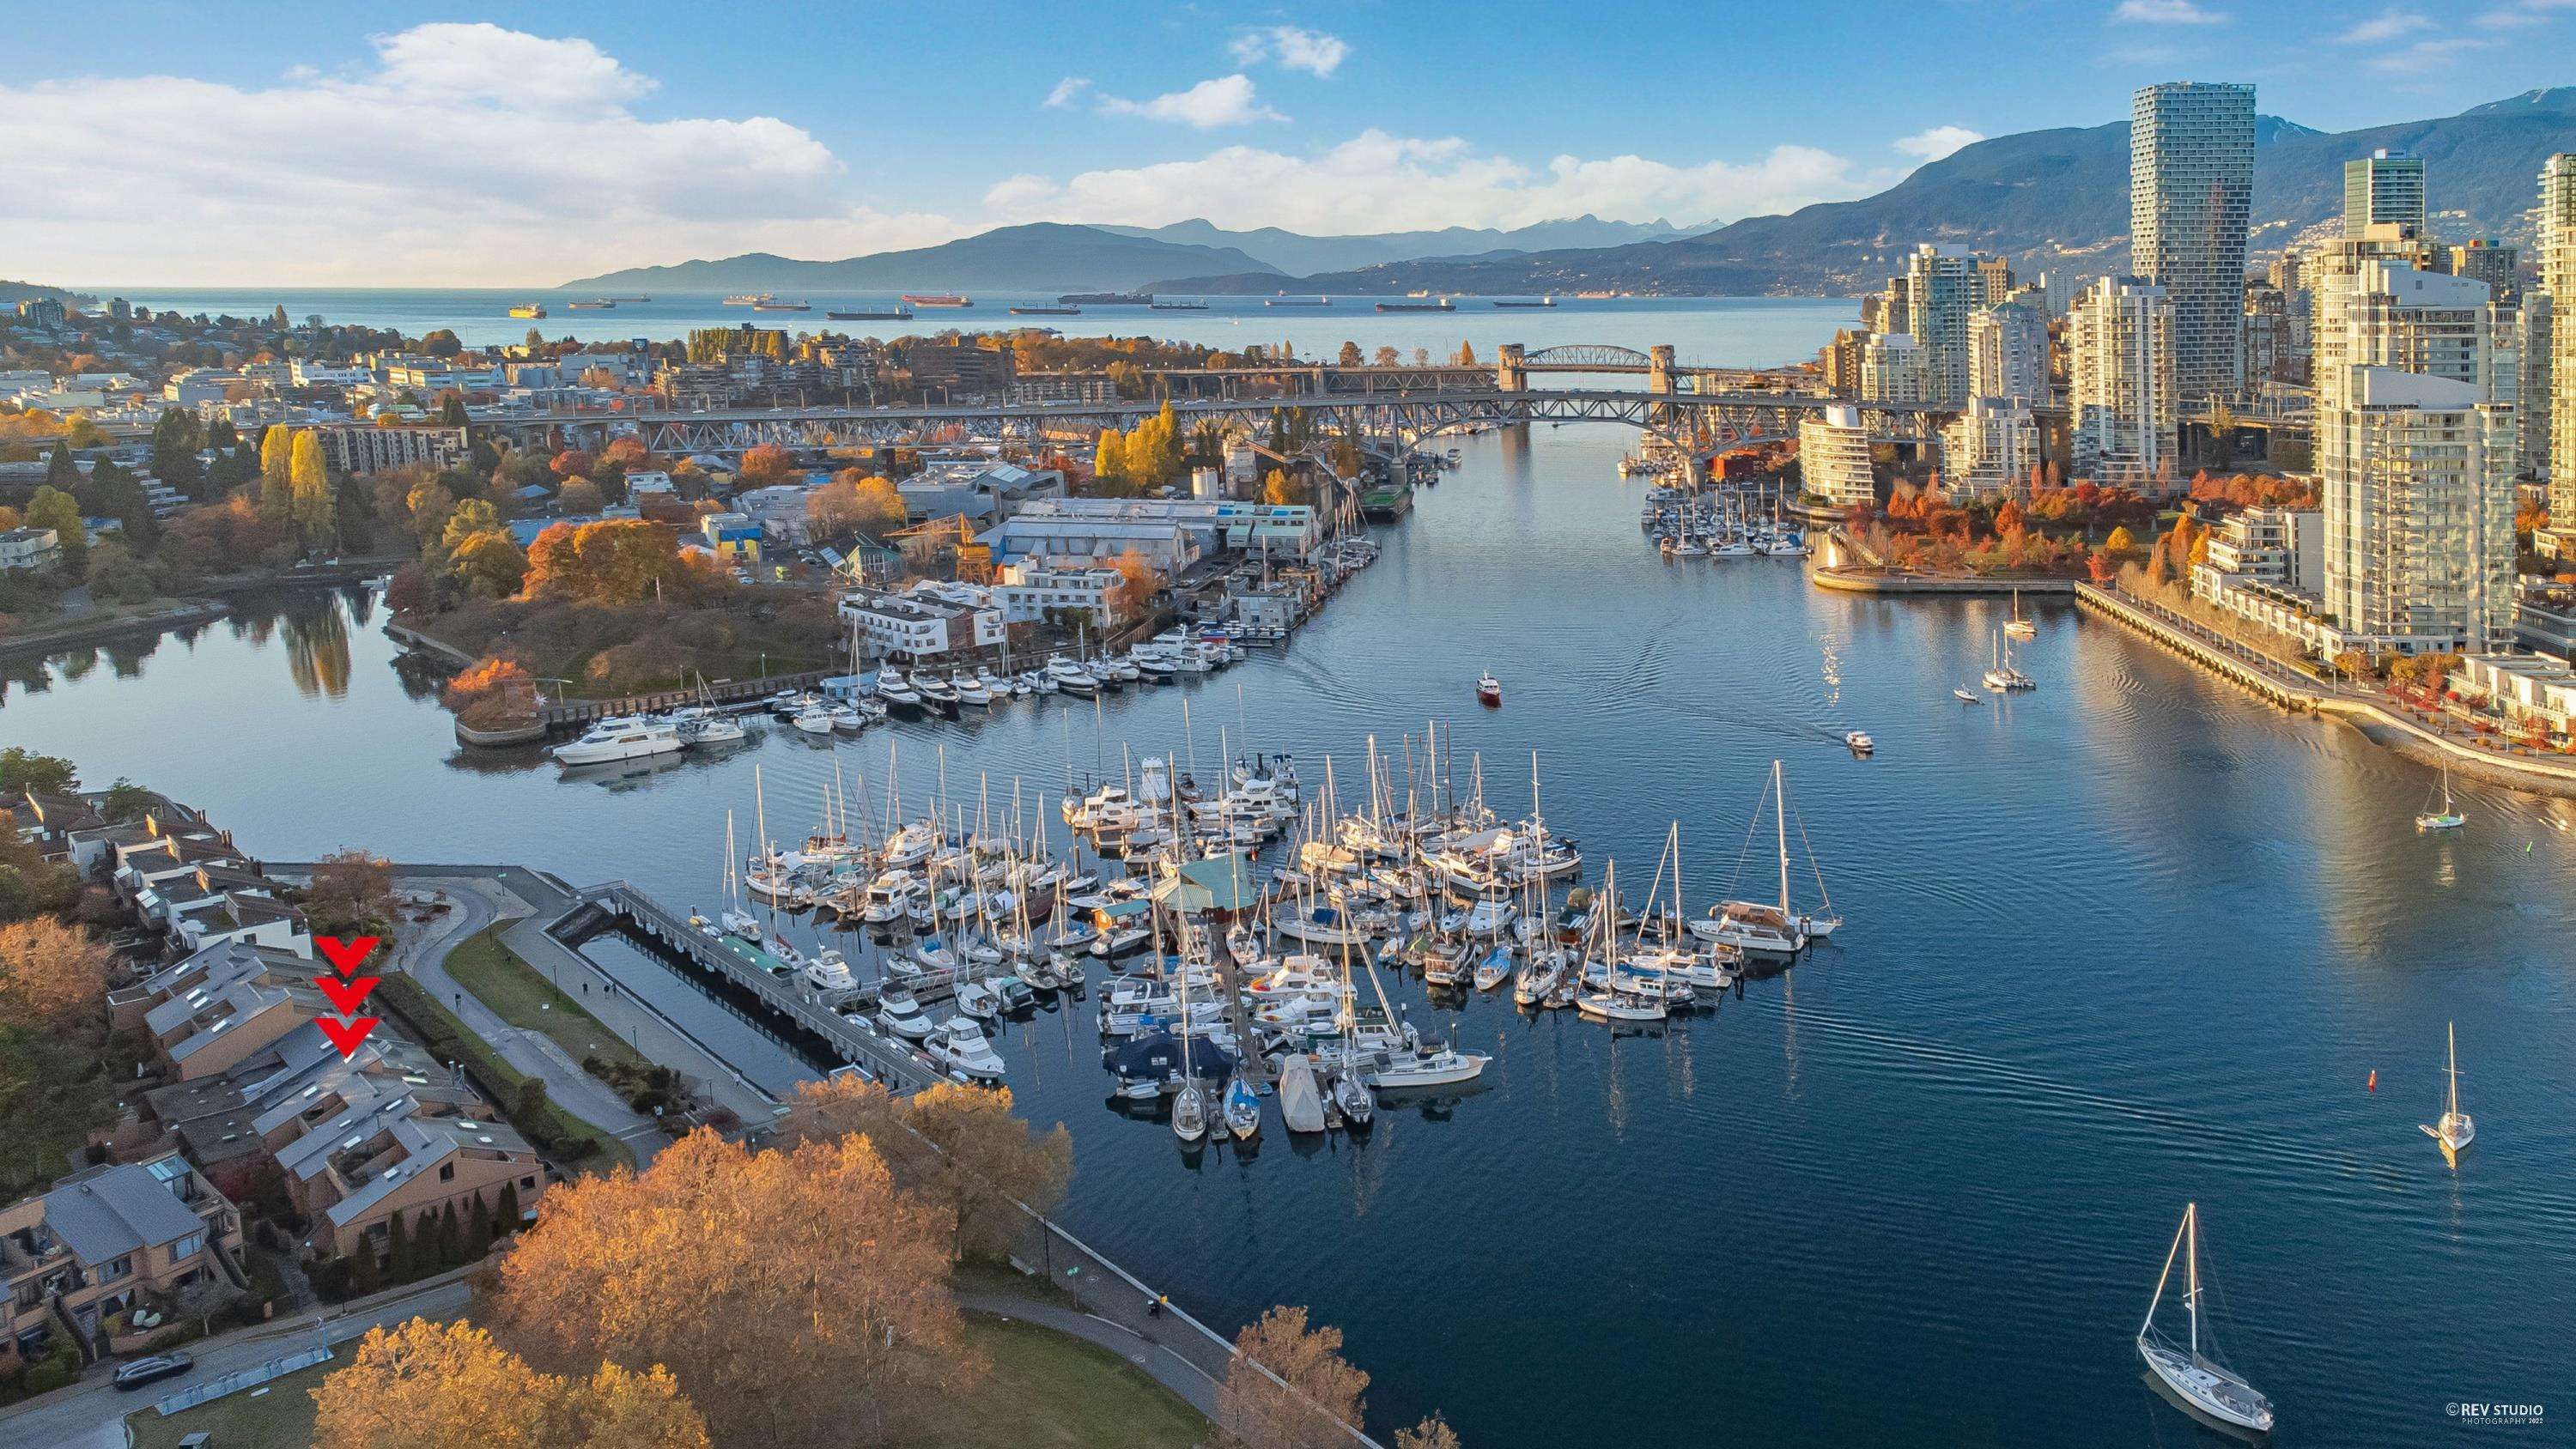 Open House. Open House on Sunday, November 20, 2022 2:00PM - 4:00PM
WATERFRONT TOWNHOUSE w/ stunning water, marina, cityscape and mtn views. 180 degree views W out to English Bay sunsets and E to the Cambie St. Bridge sunrises. Renovation by Colbrone Arch